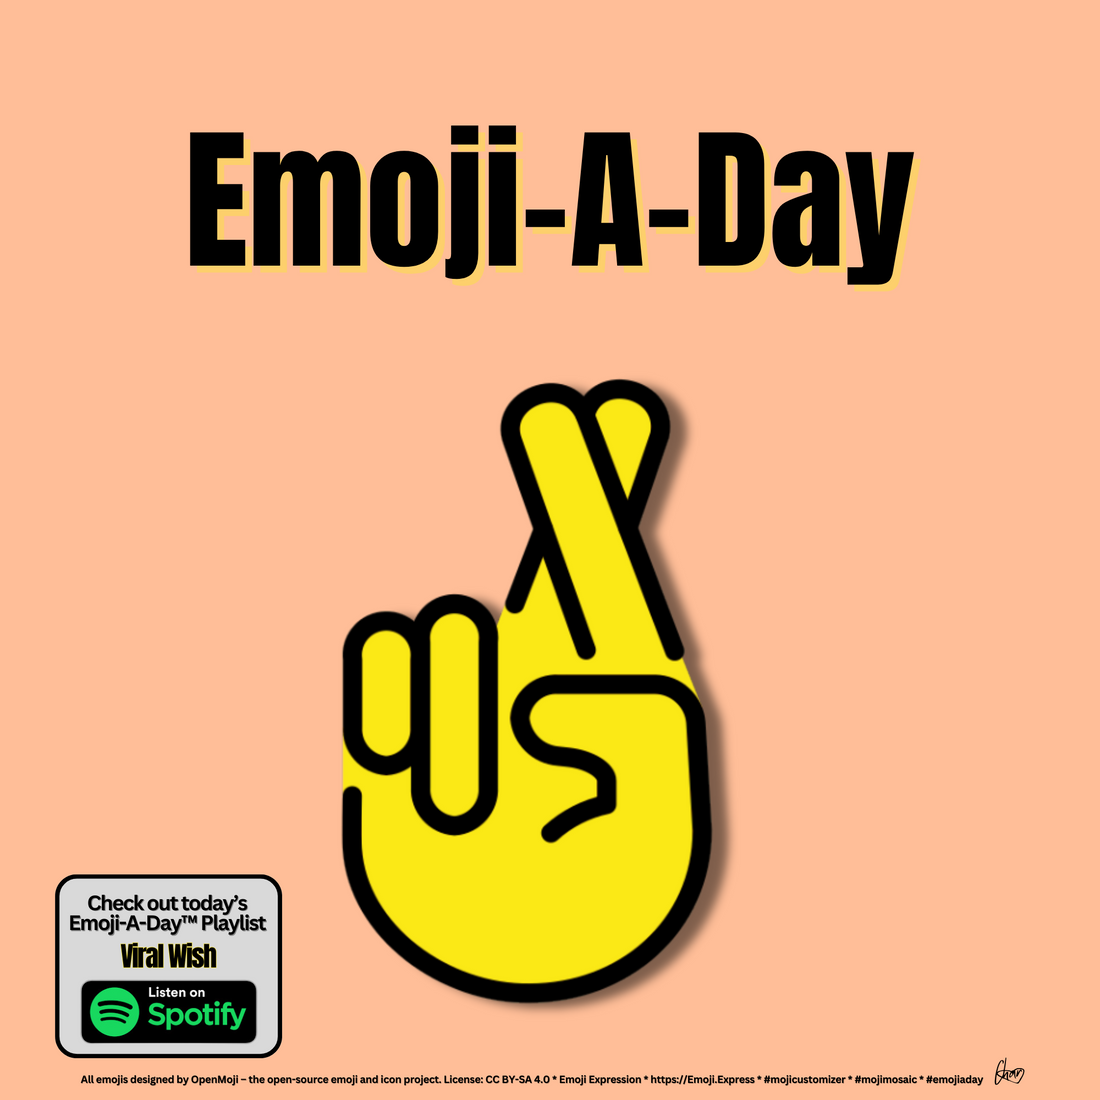 Emoij-A-Day theme with Fingers Crossed emoji and Viral Wish Spotify Playlist